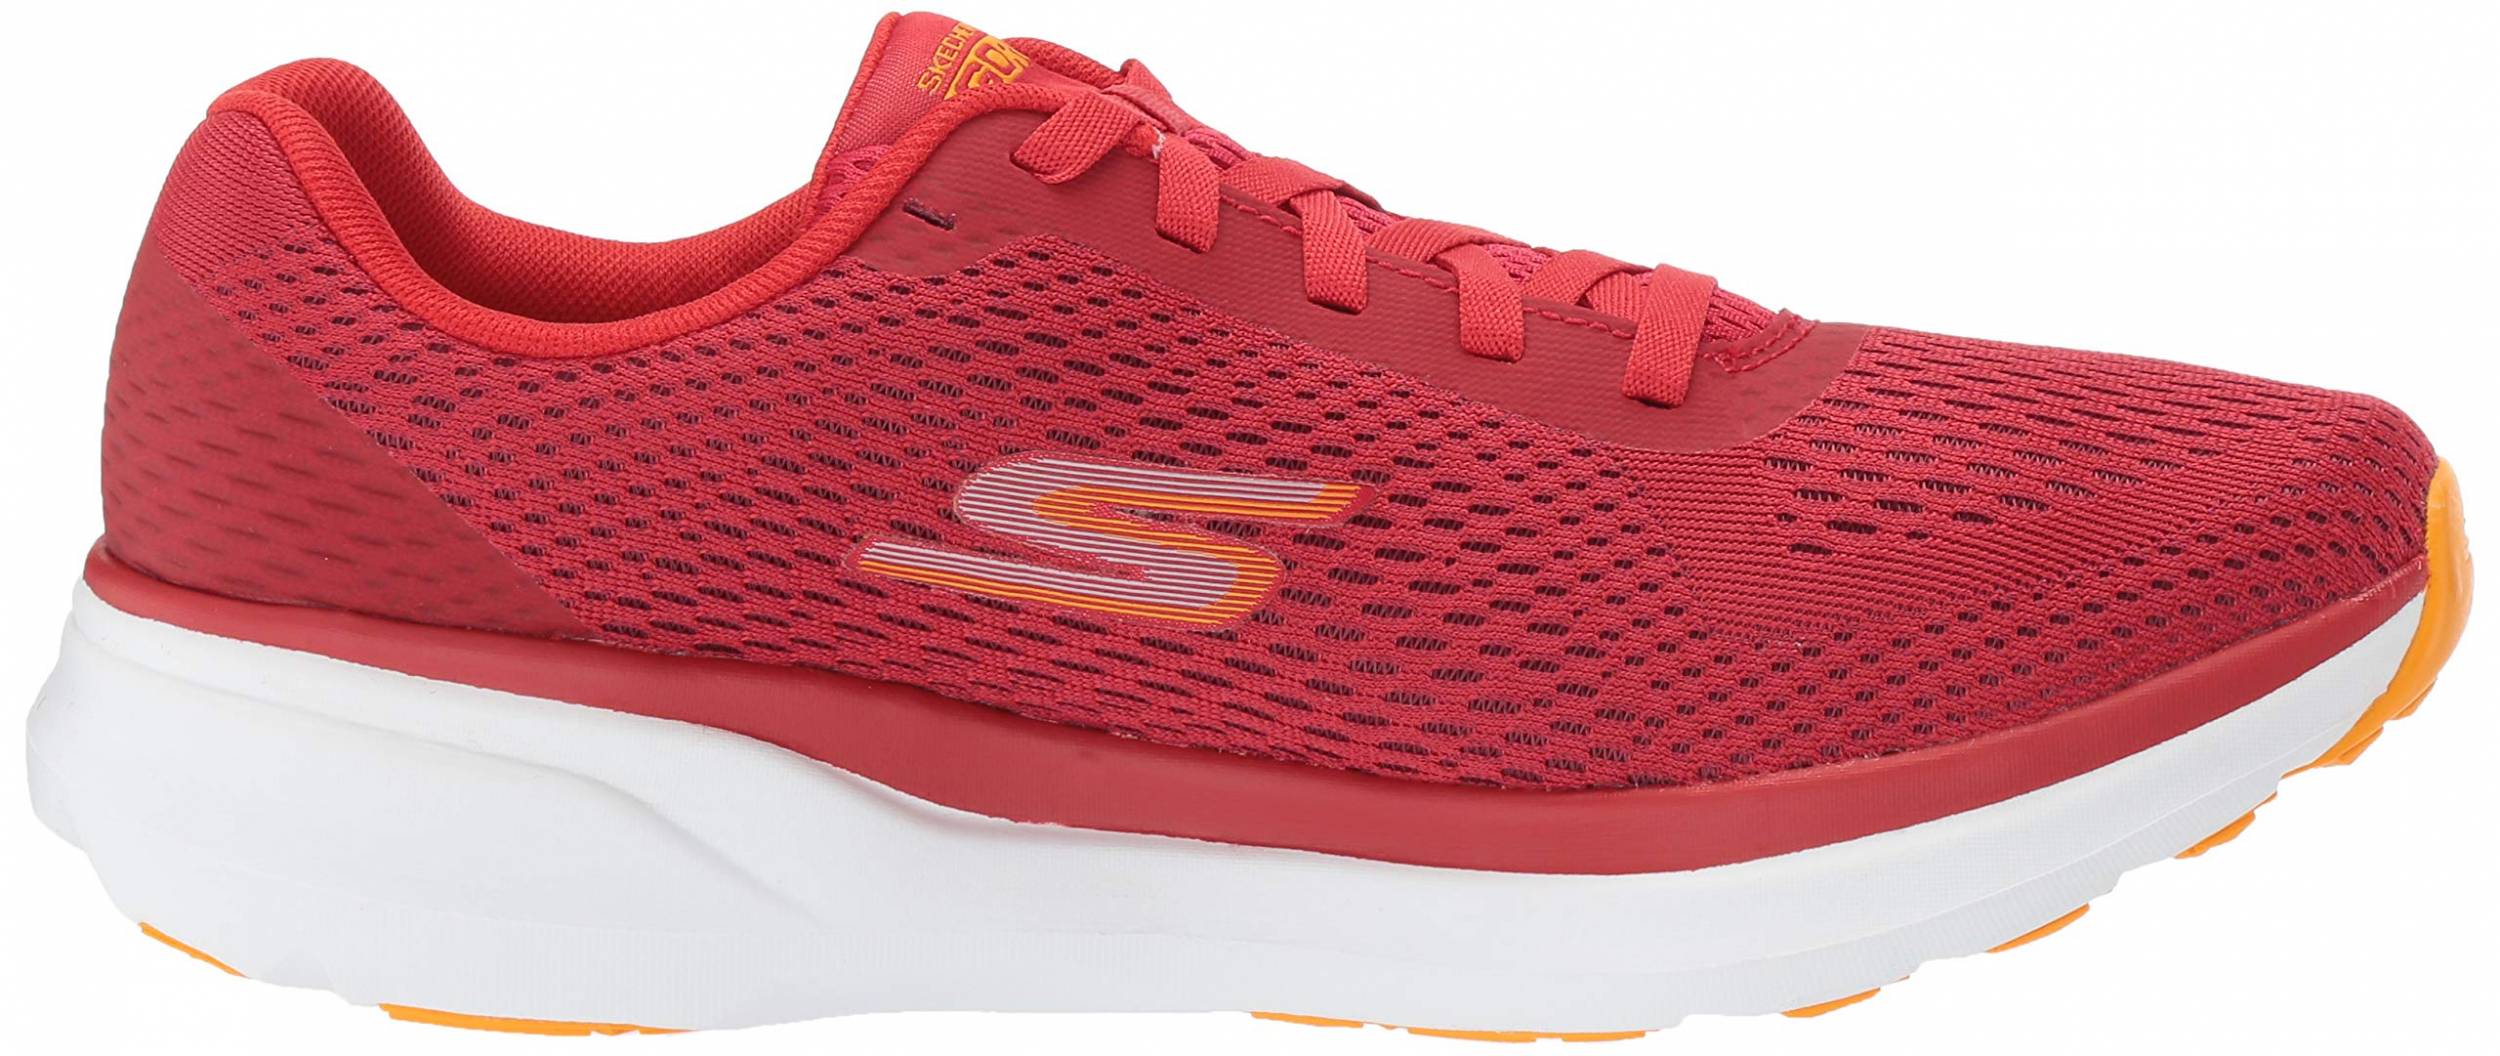 skechers stride running shoes reviews